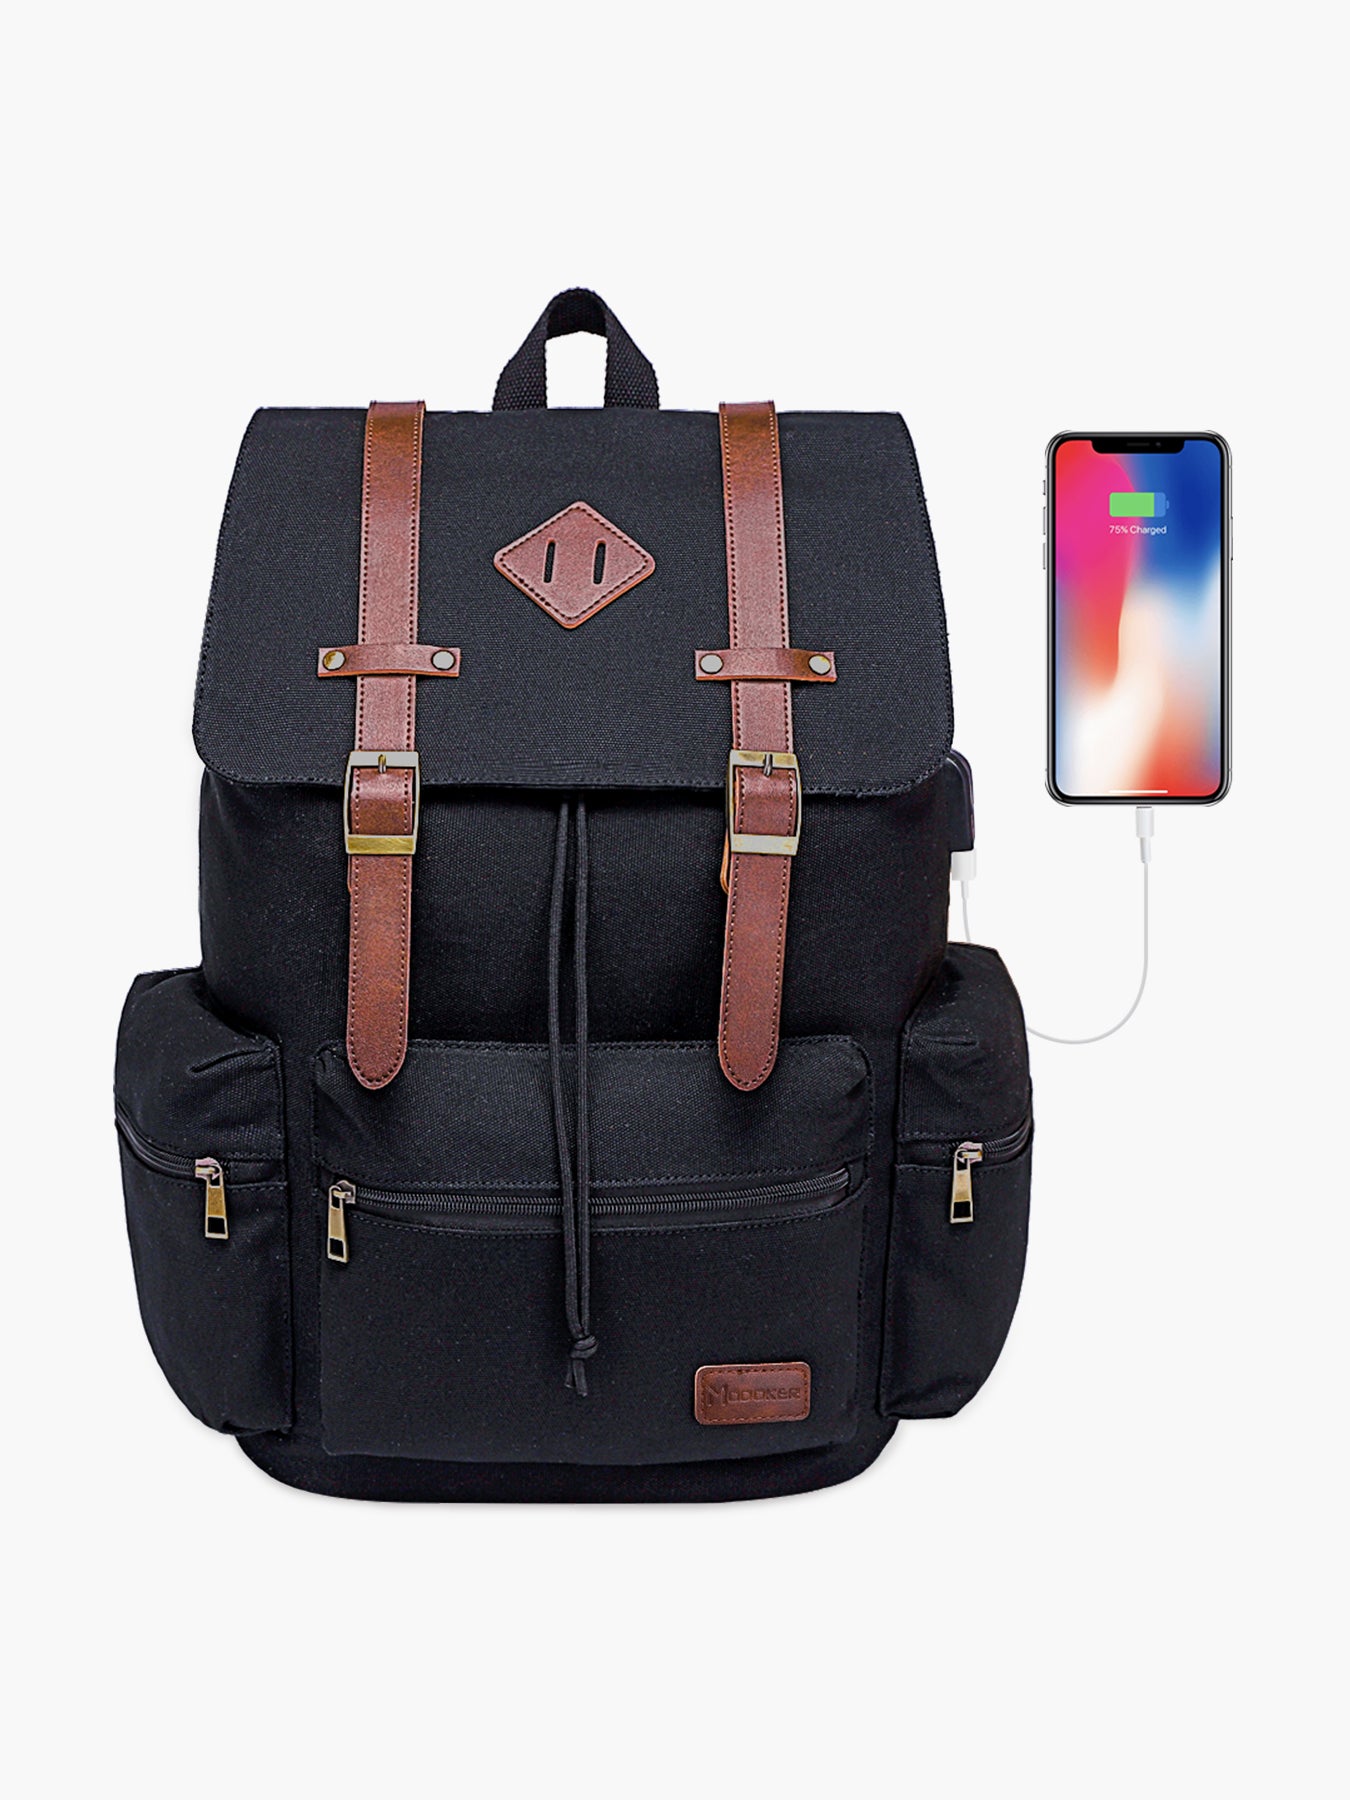 Travel Laptop Backpack Fits 17 Inch Computer & Tablet With USB Charging Port